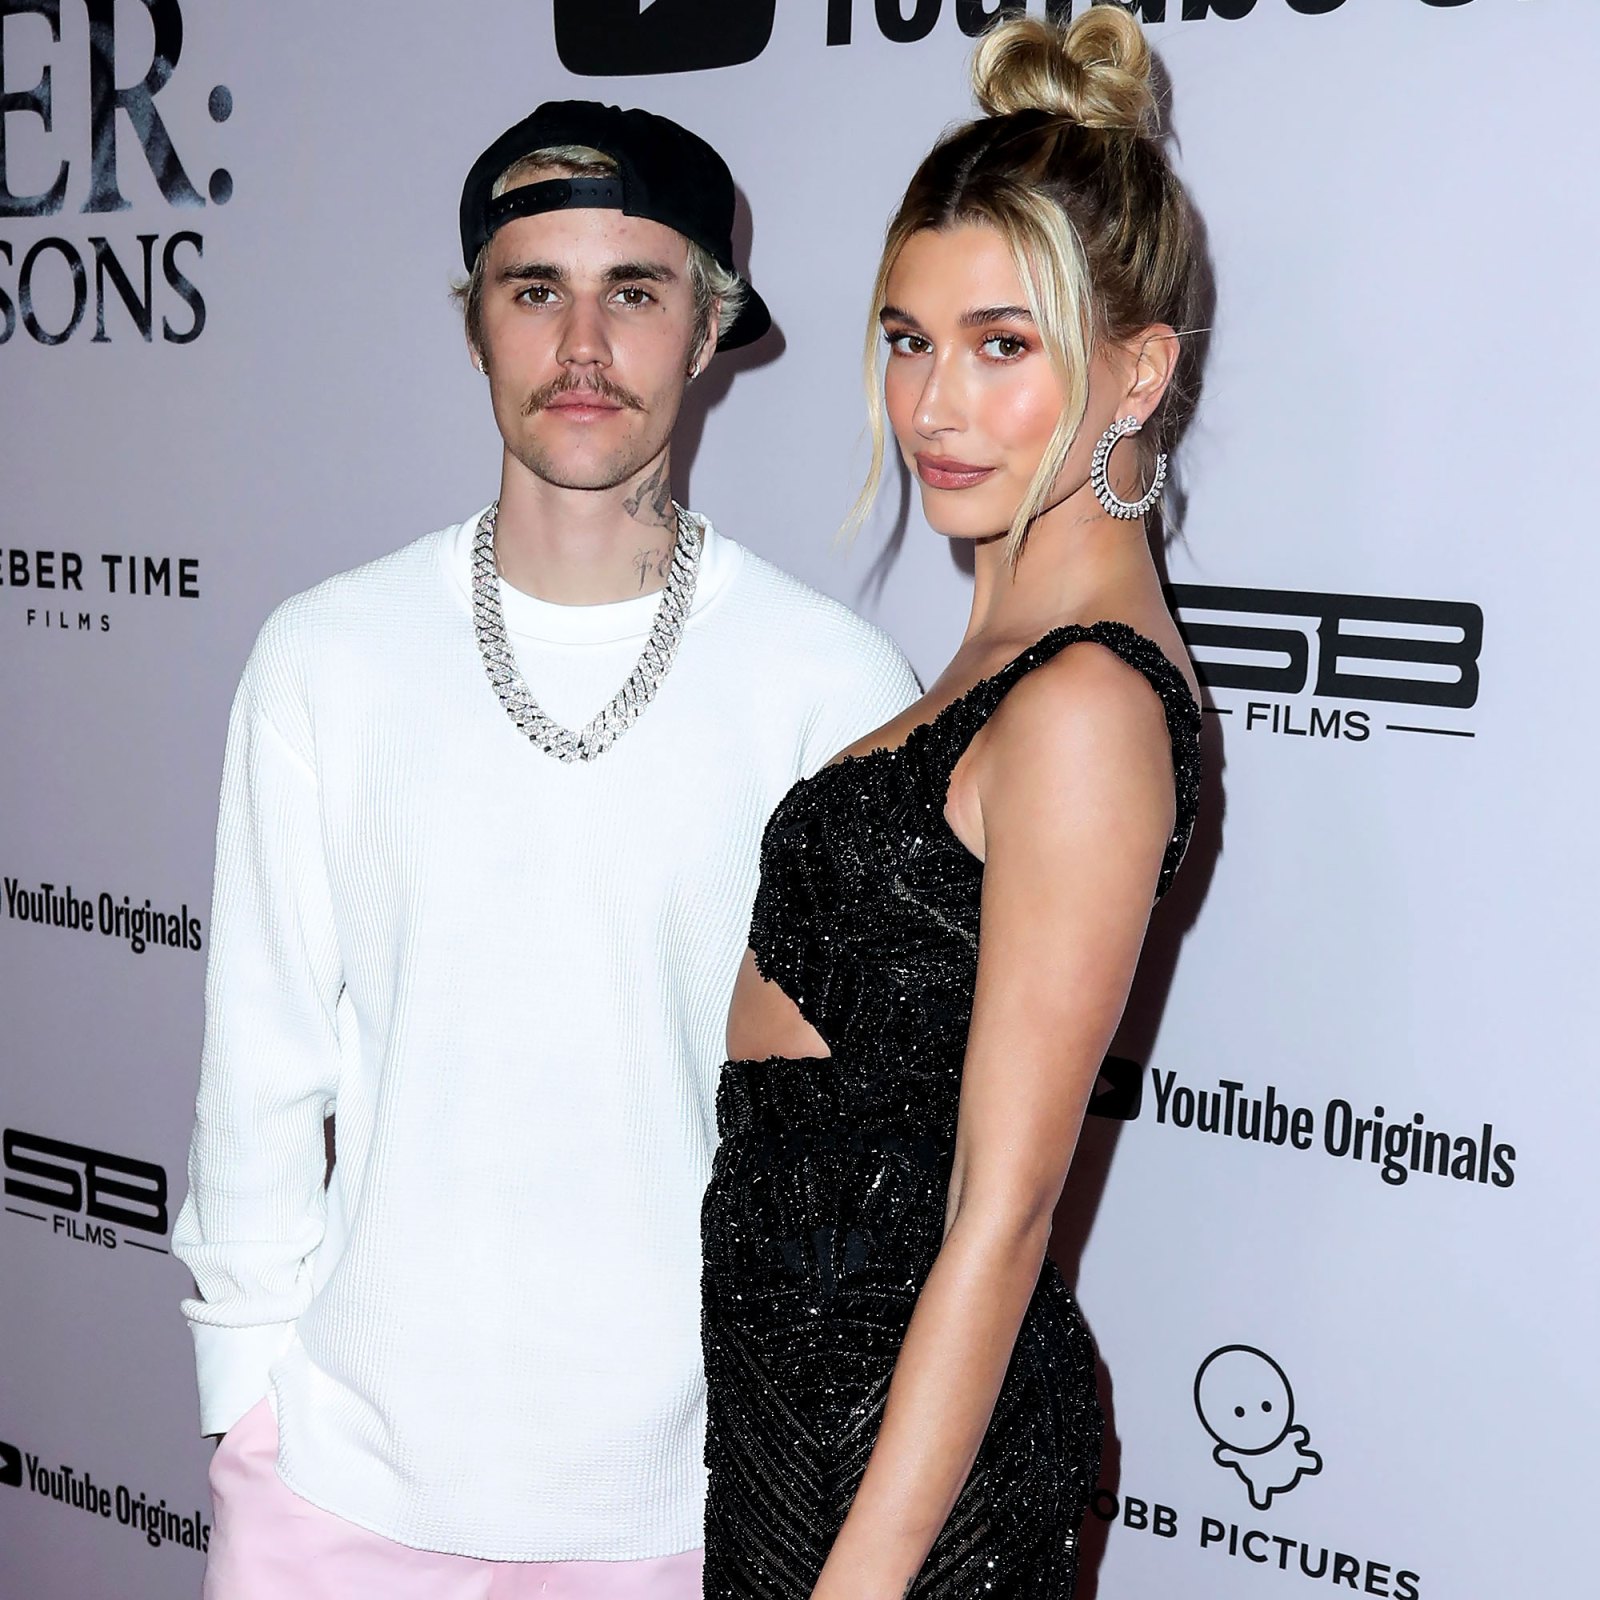 Hailey Baldwin Opens Up About Taking Her Marriage to Justin Bieber 1 Day at a Time